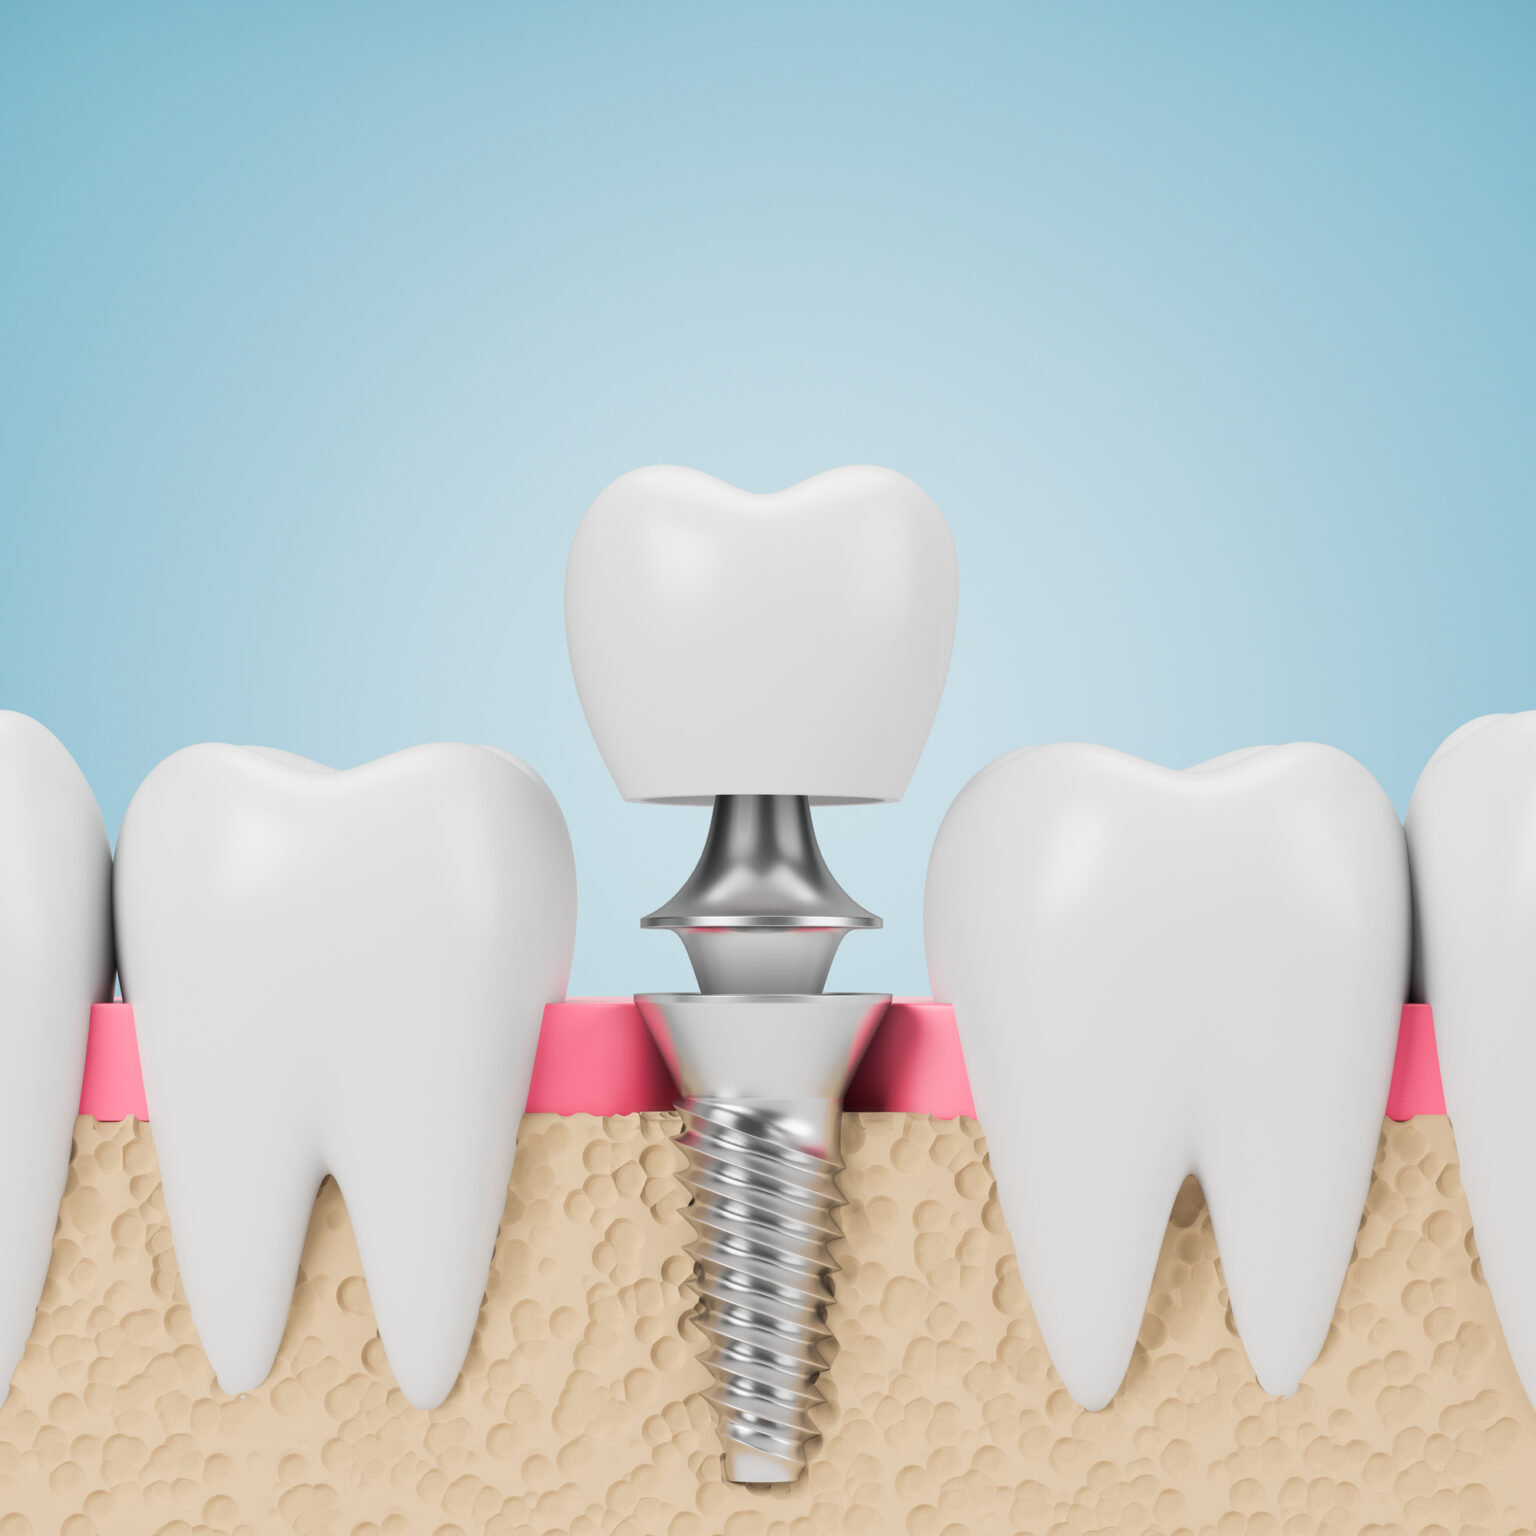 Dental implant between natural teeth against a blue background by an affordable Dallas dentist.